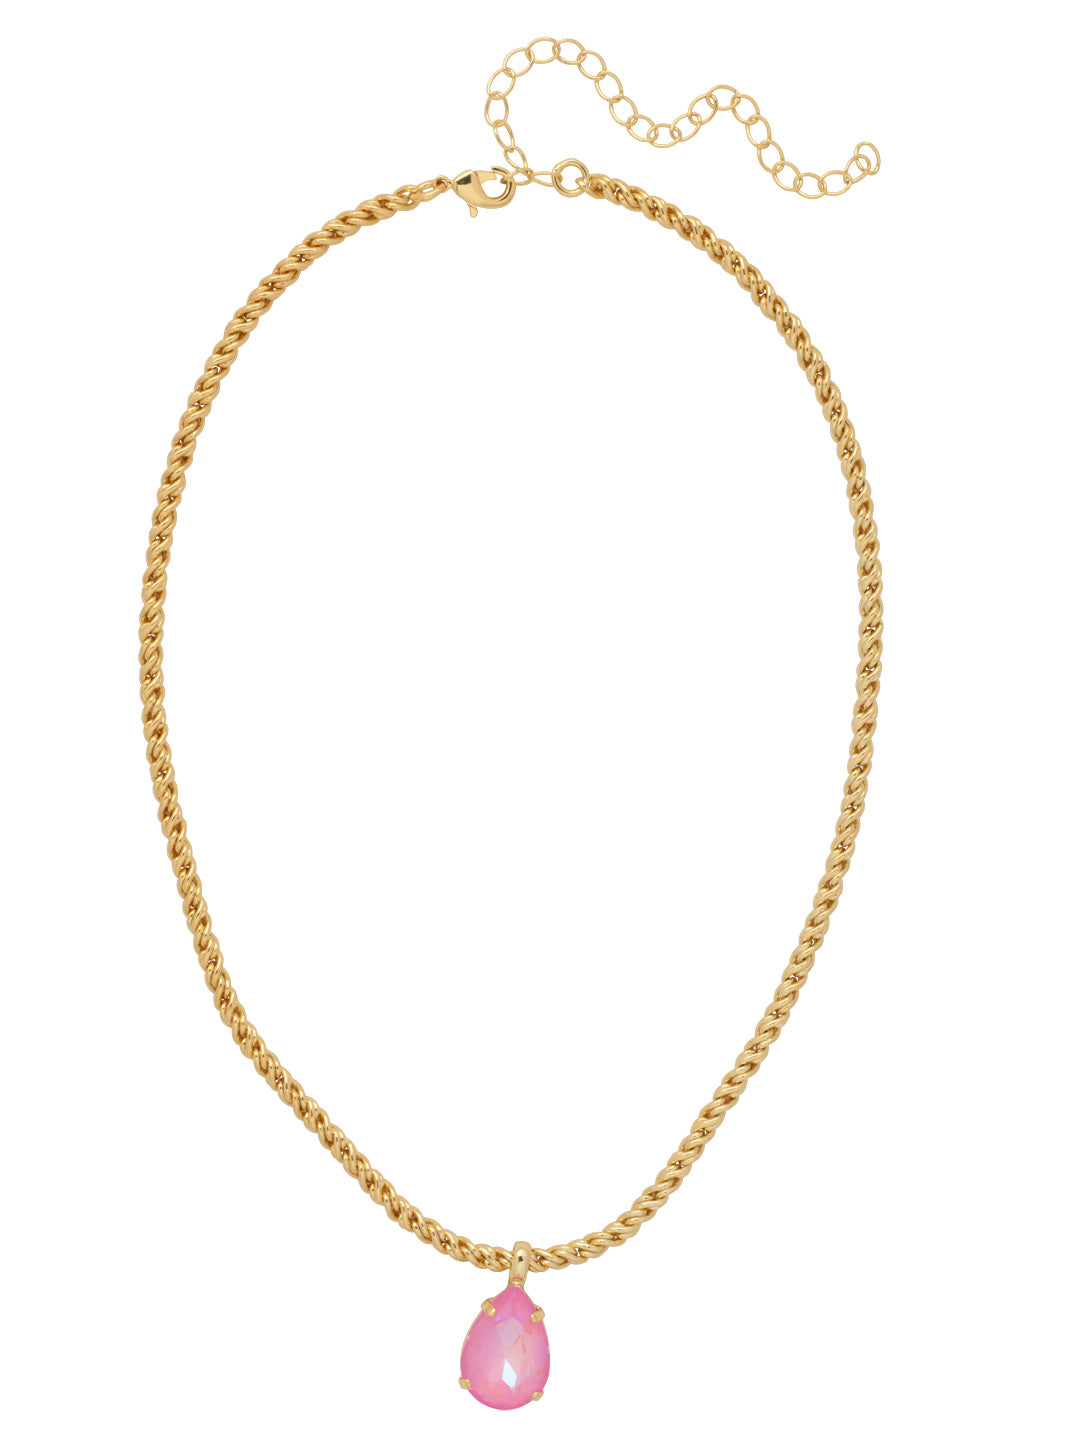 Eileen Pendant Necklace - NFF10BGLRD - <p>The Eileen Pendant Necklace features a single pear cut candy gem on an adjustable rope chain, secured by a lobster claw clasp. From Sorrelli's Light Rose Delite collection in our Bright Gold-tone finish.</p>